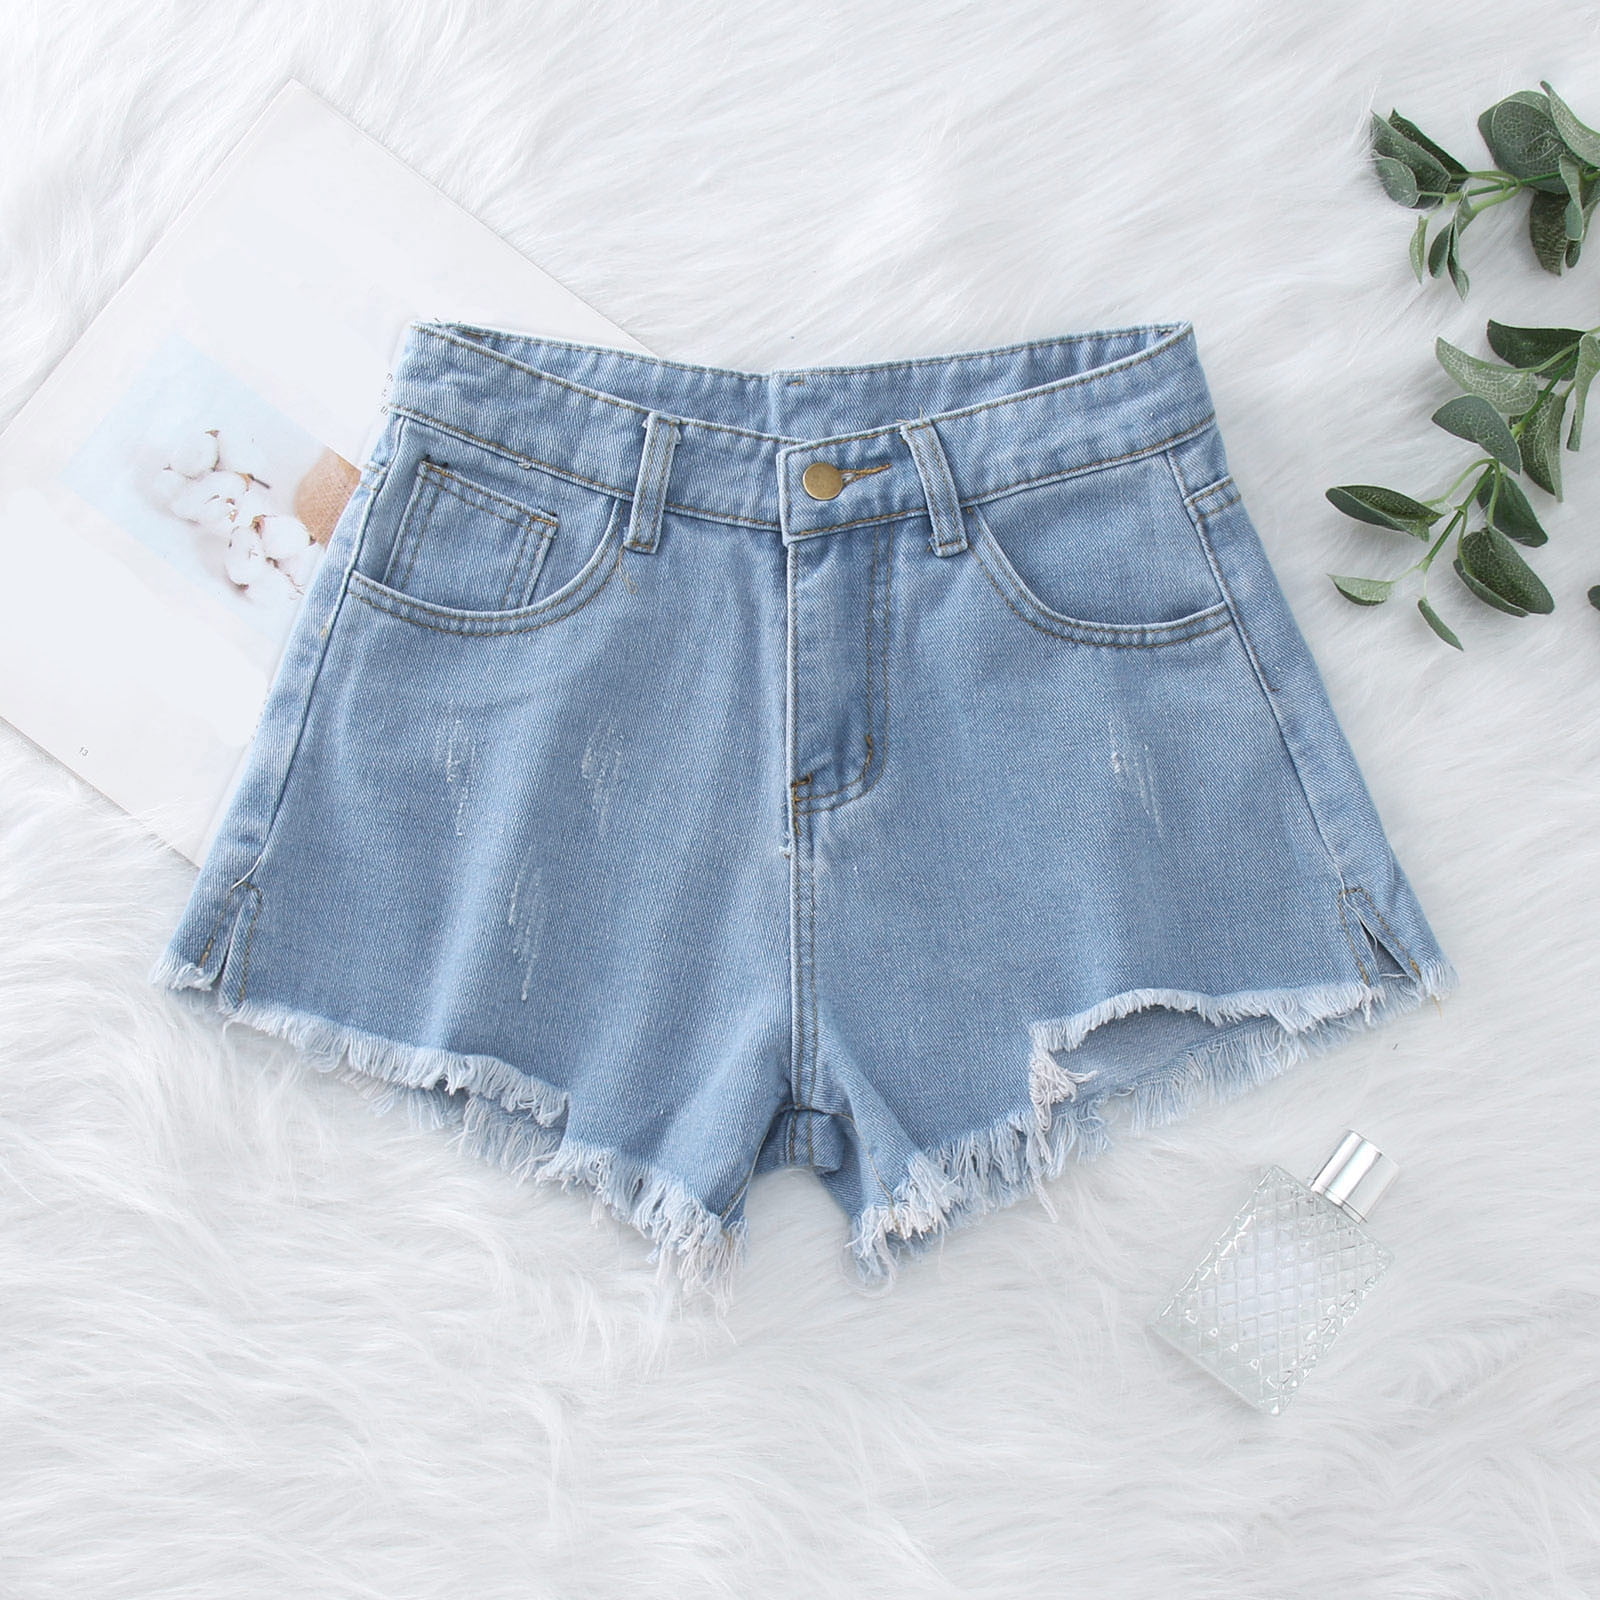 Aayomet Womens Jean Shorts Womens Jean Shorts High Waisted Denim Shorts  Ripped Frayed Casual Stretchy Shorts Blue B,M 